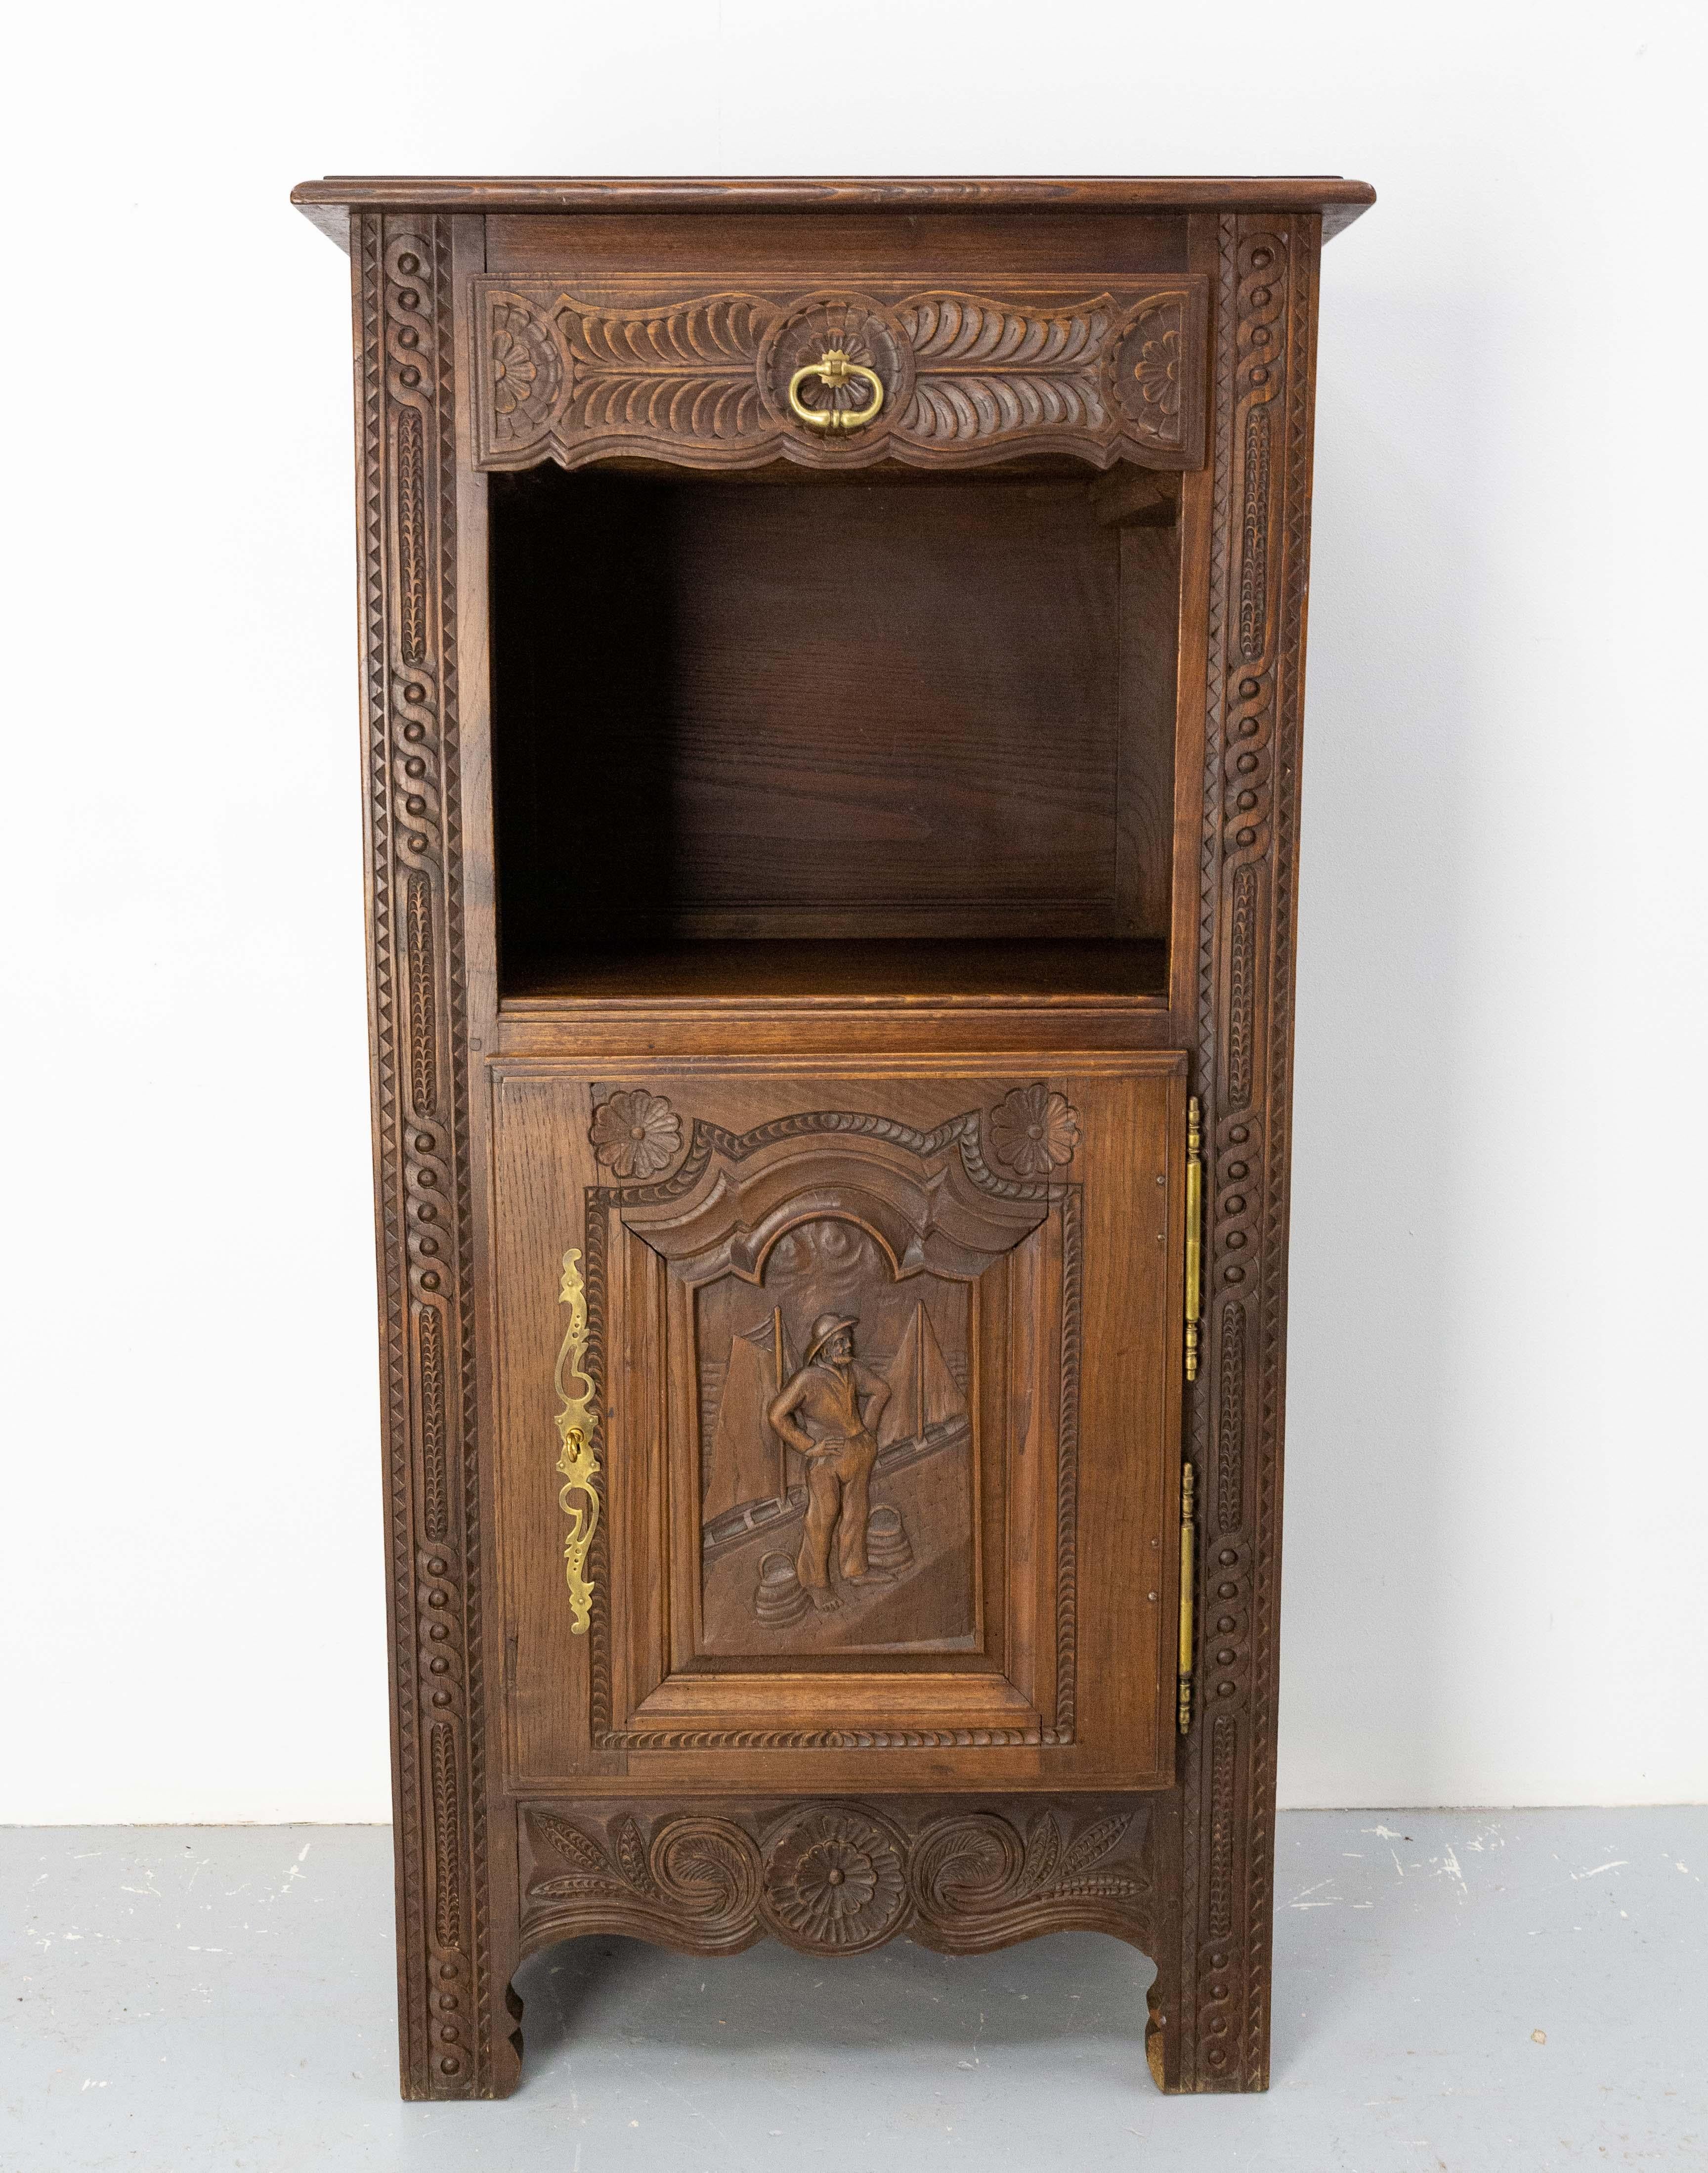 Chestnut little buffet or side table. 
This cabinet is carved with motifs and a typical scene of Brittany in France. On the door a sailor in a port awaits the ships of the fishermen to supply them with water. Behind him two fishing boats are